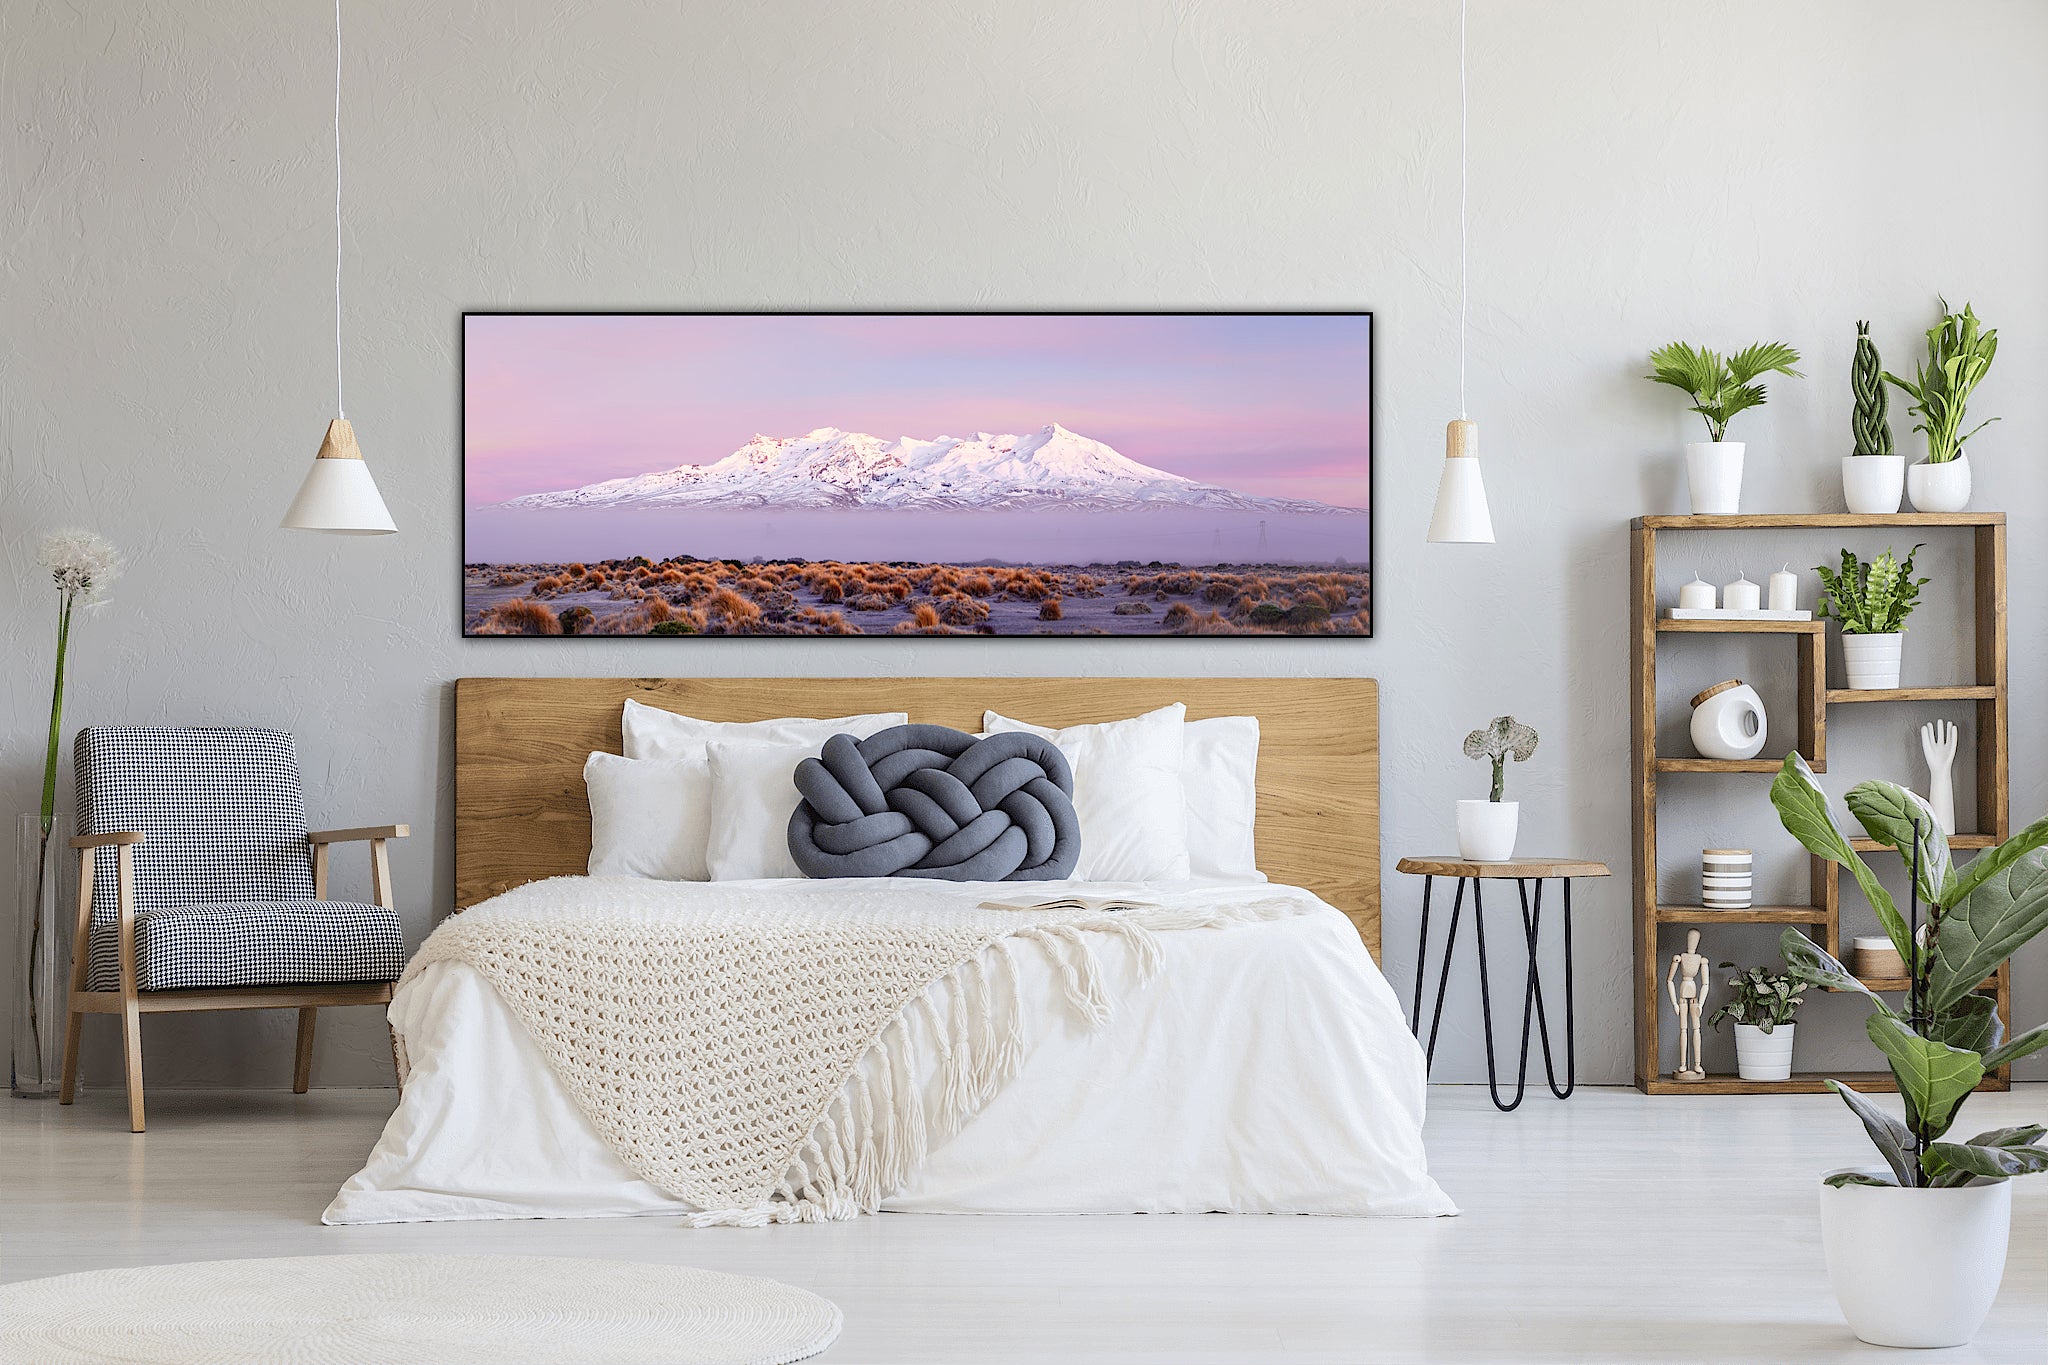 Connecting with Nature- The Power of Landscape Photography in Interior Decor by Award Winning New Zealand Landscape Photographer Stephen Milner